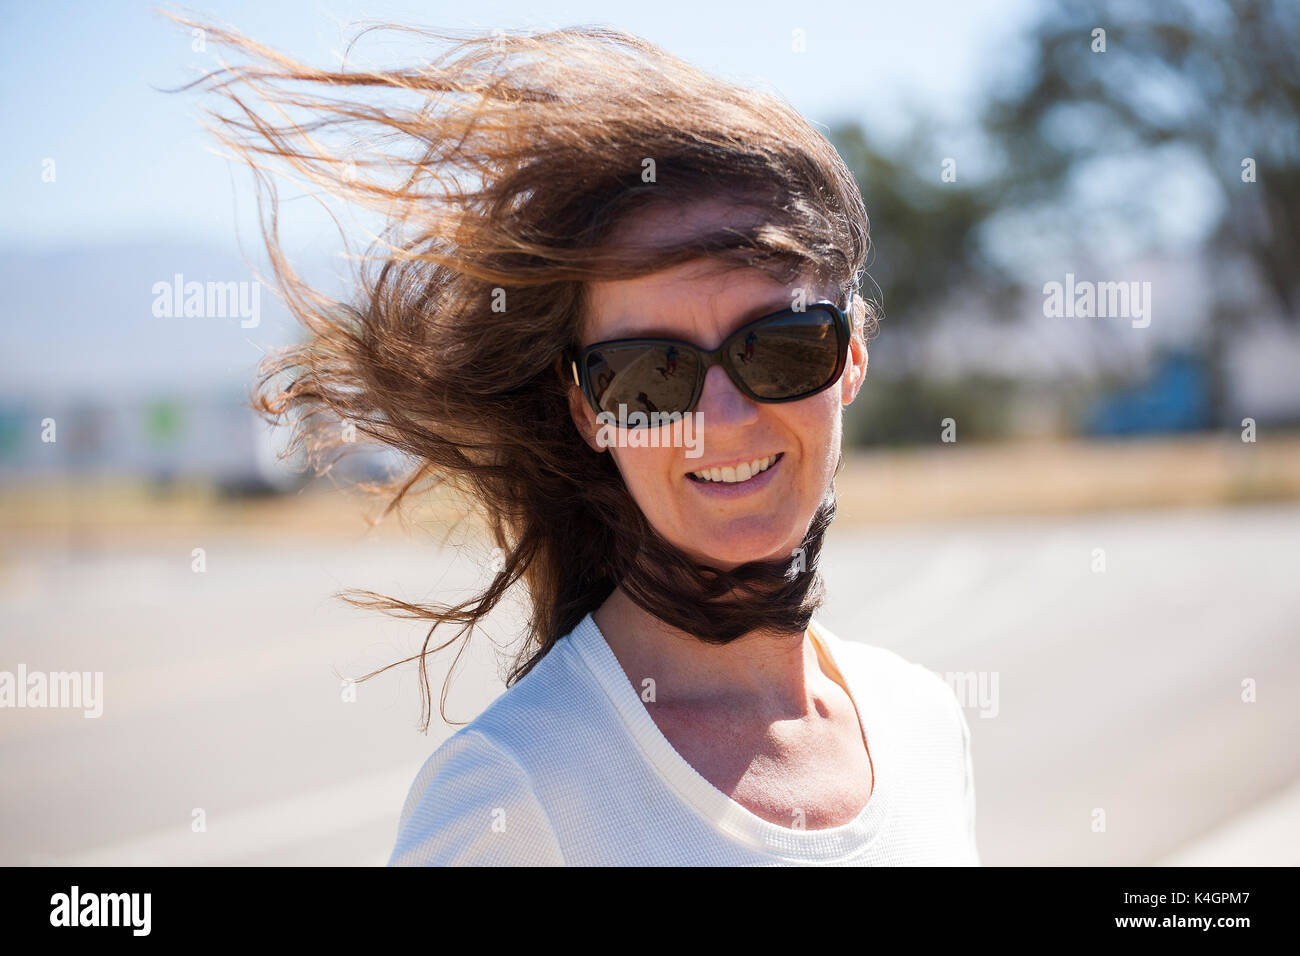 A woman experiences high winds in central California Stock Photo